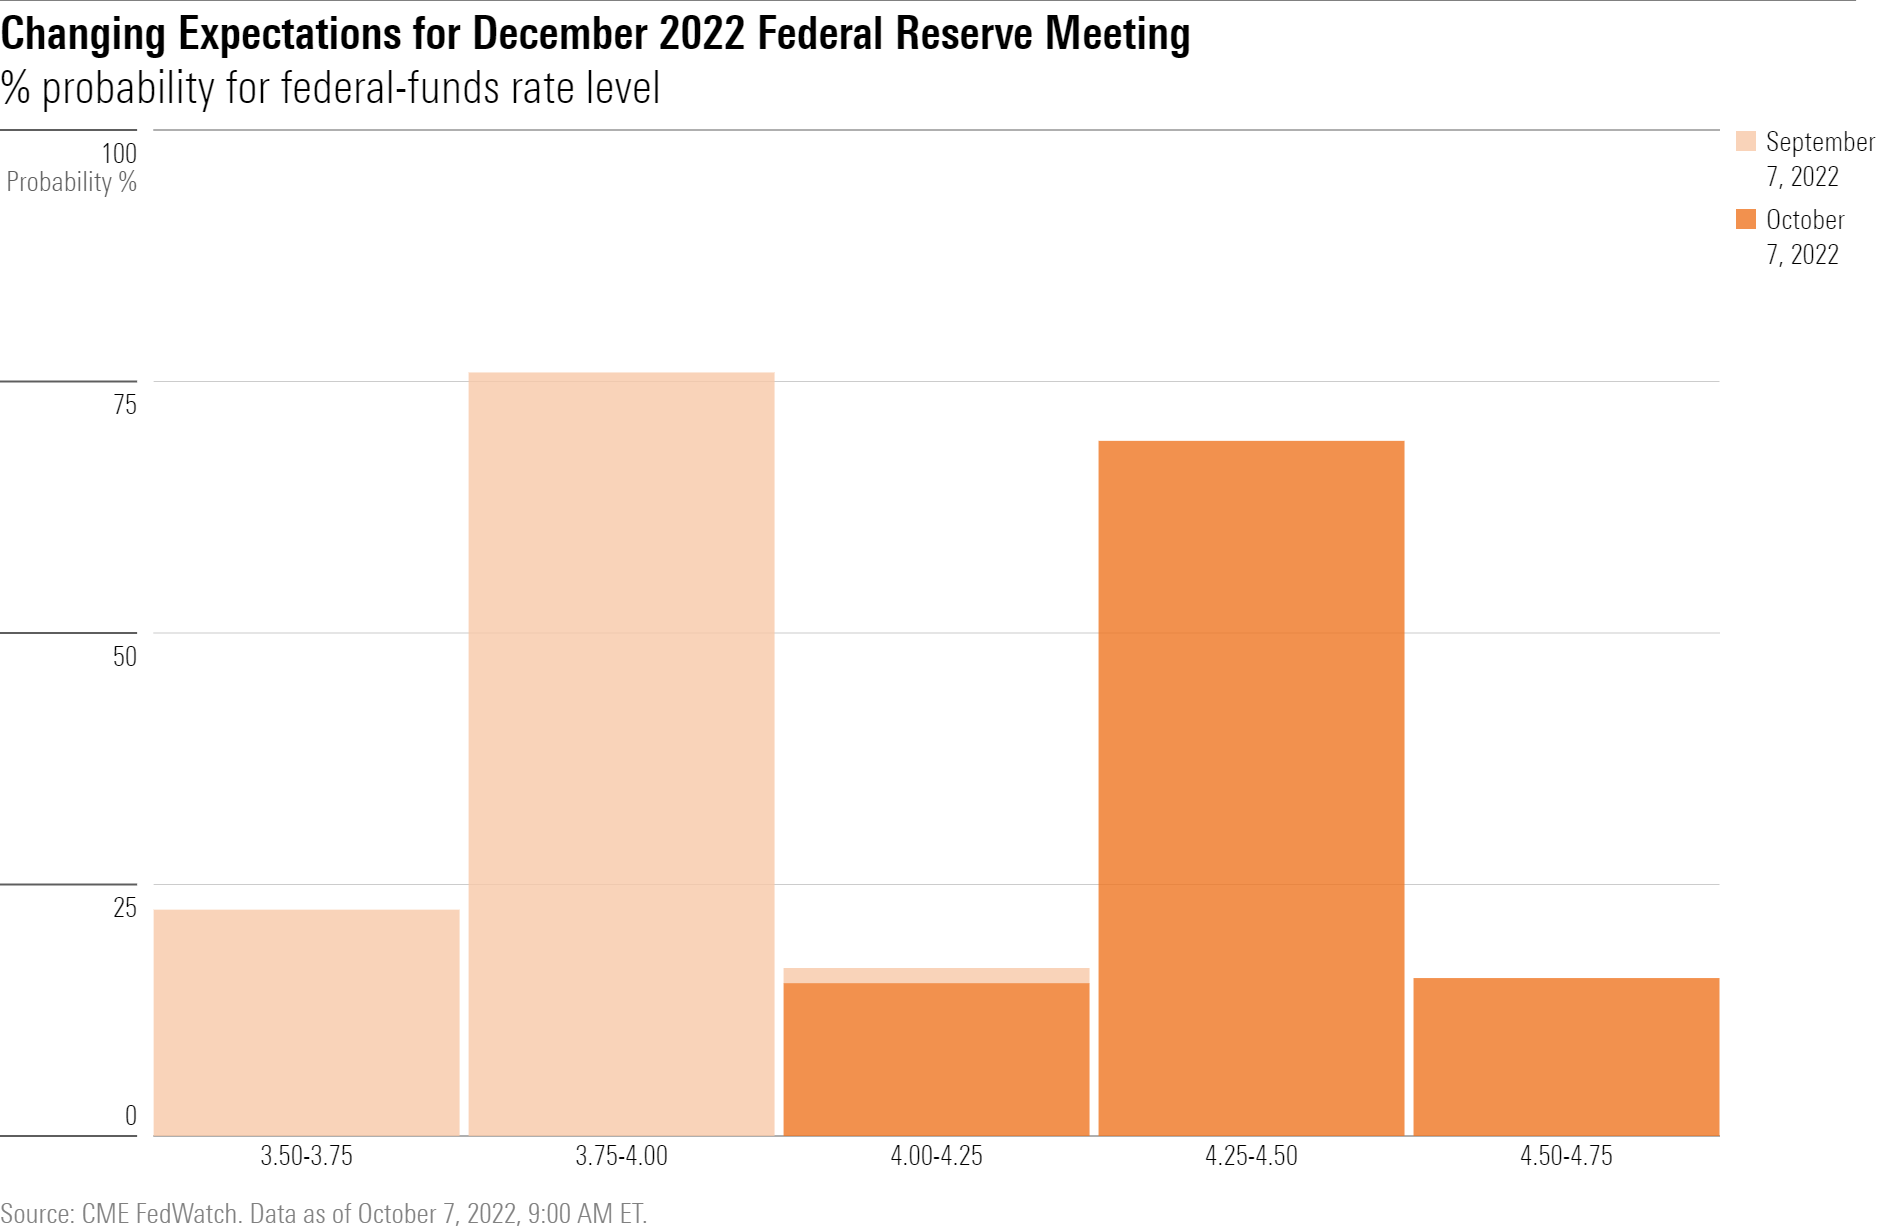 Probabilities for the federal-funds effective rate for the December 2022 Federal Reserve policy meeting, based on futures market expectations.